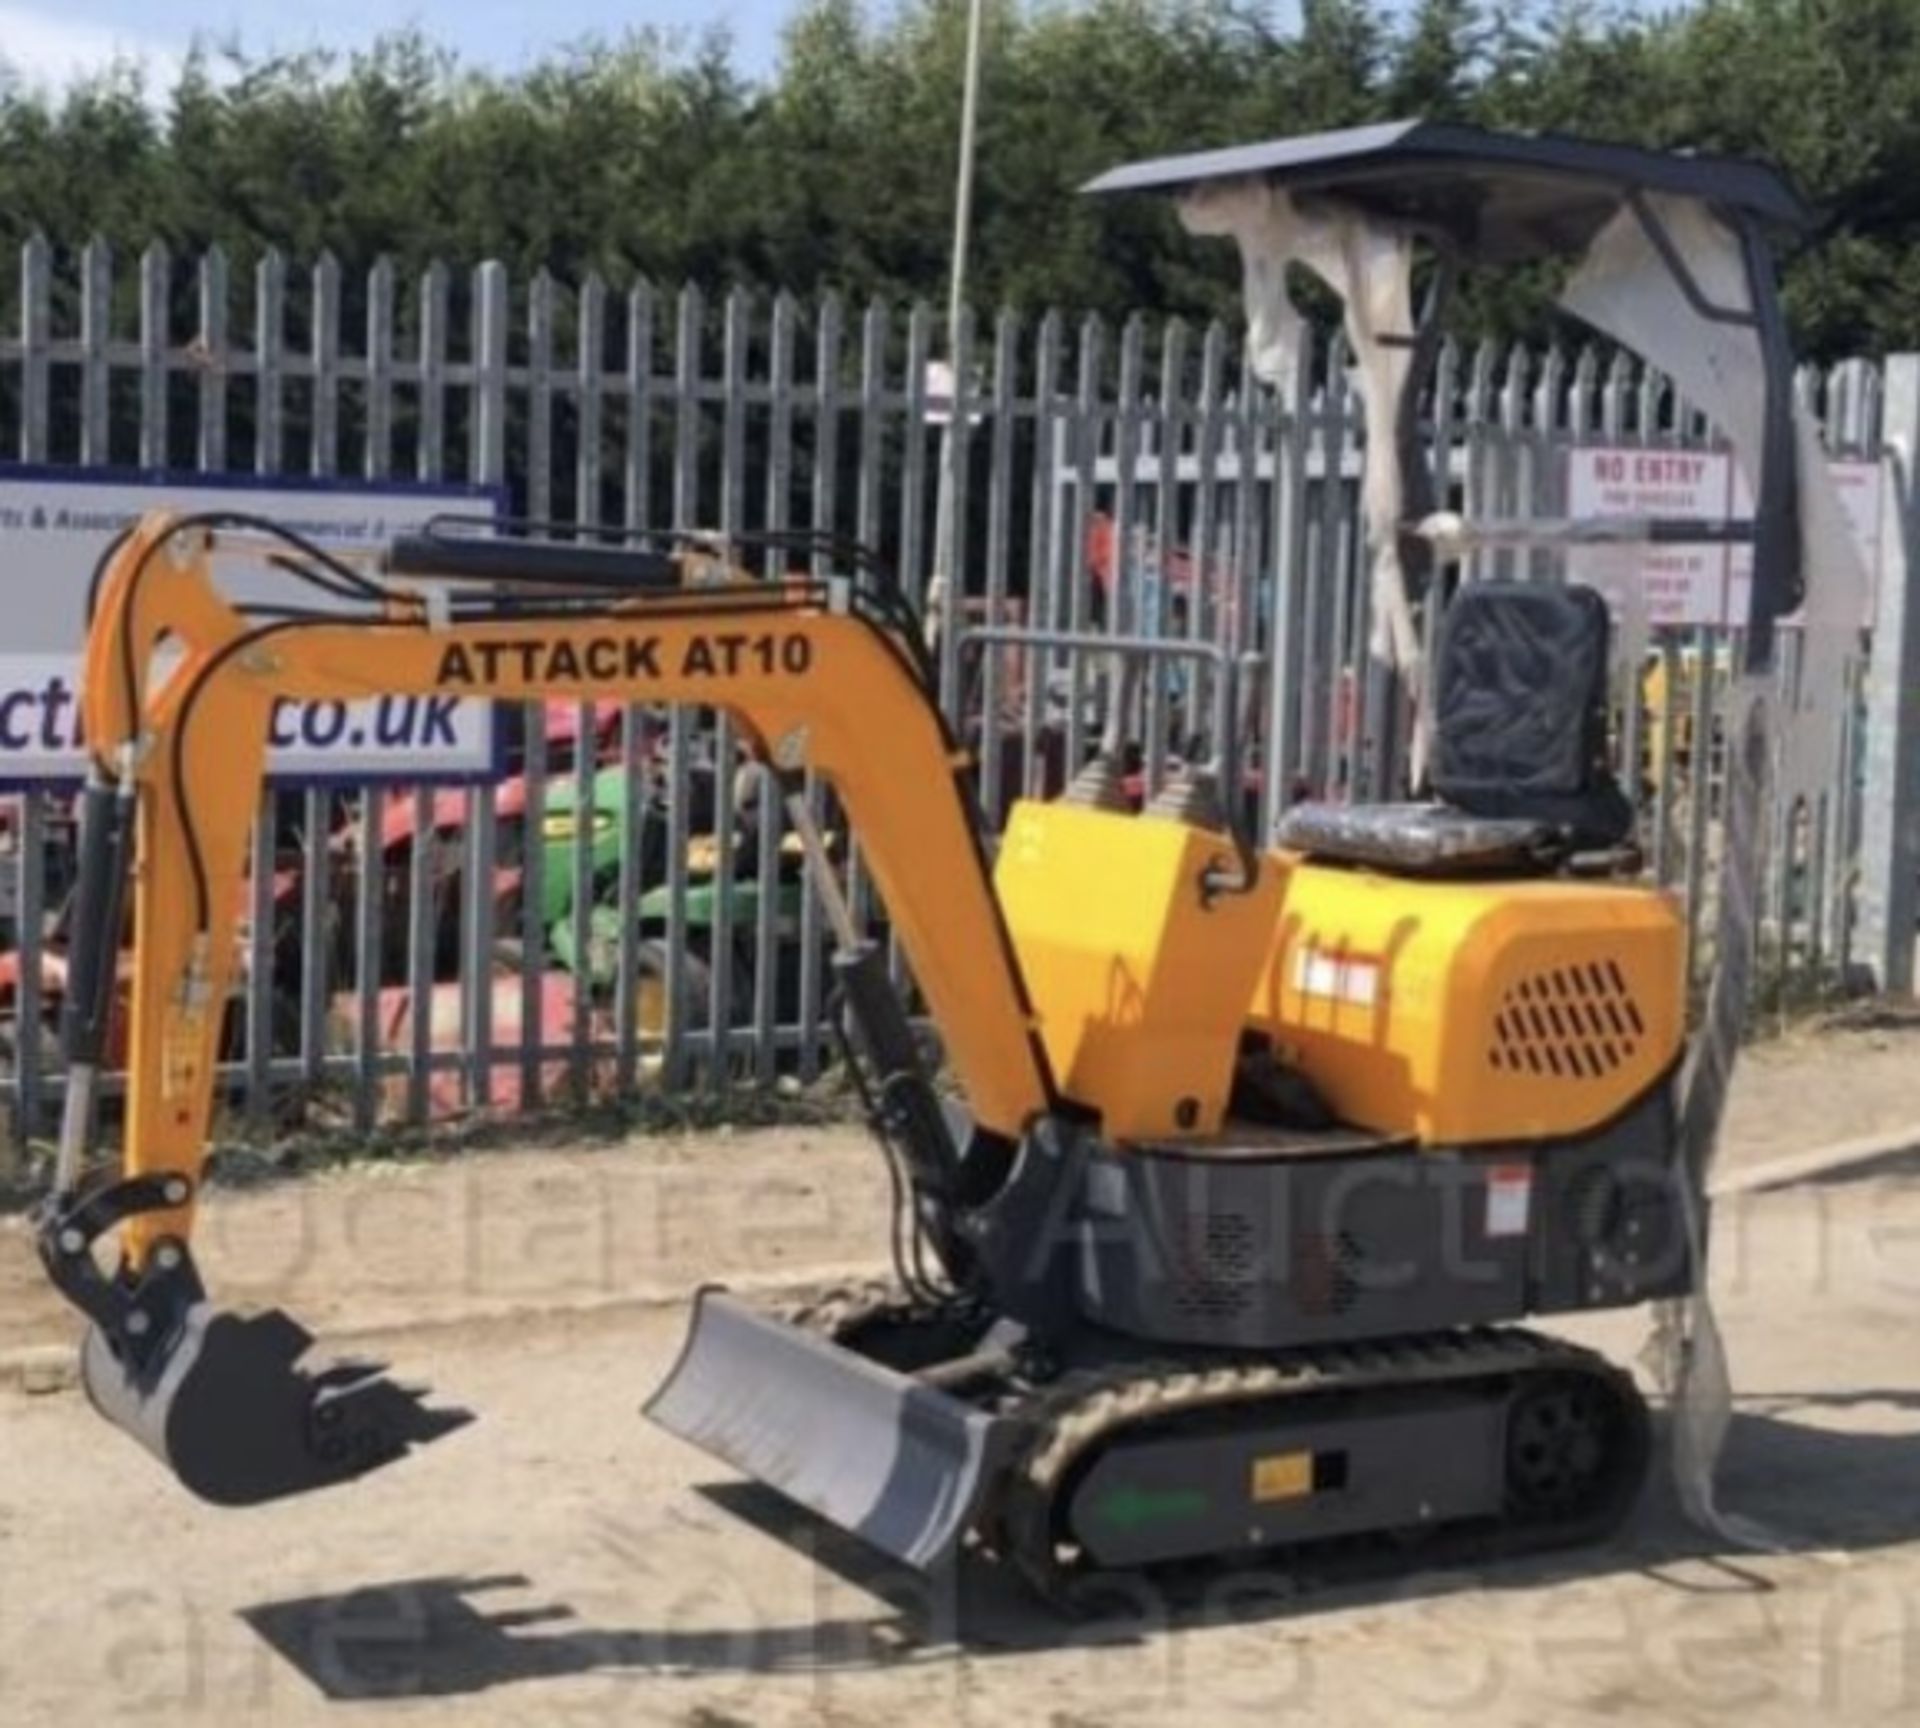 2022 ATTACK AT10 MINI DIGGER UNUSED *LOCATION NORTH YORKSHIRE* - Image 3 of 3